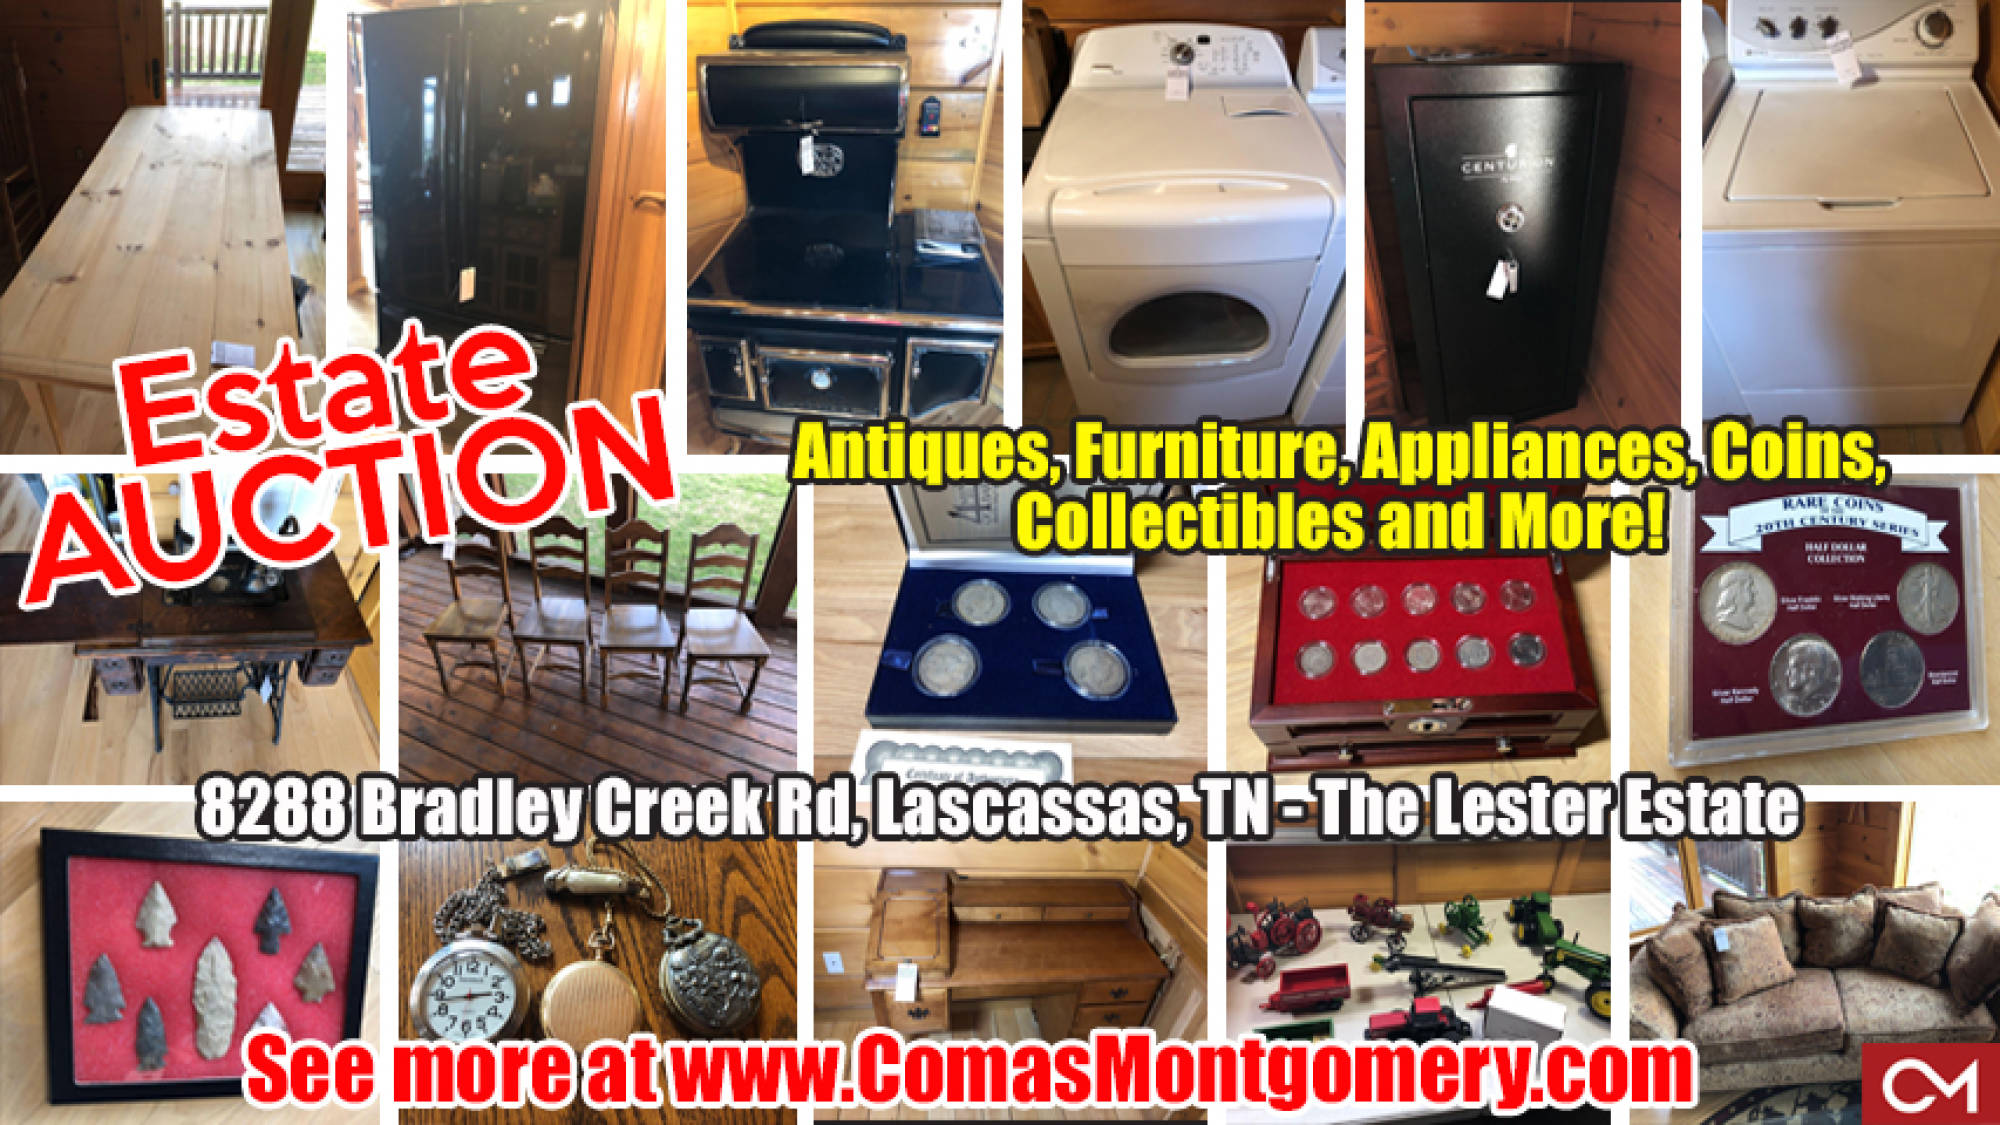 Furniture, Appliances, For Sale, Auction, Estate, Sale, Lester, Bradley, Coins, Collectibles, Knives, Firearms, Antiques, Model, Cars, Tractors, Arrowheads, Watches, Tools, Equipment, Lascassas, Tennessee, Comas, Montgomery